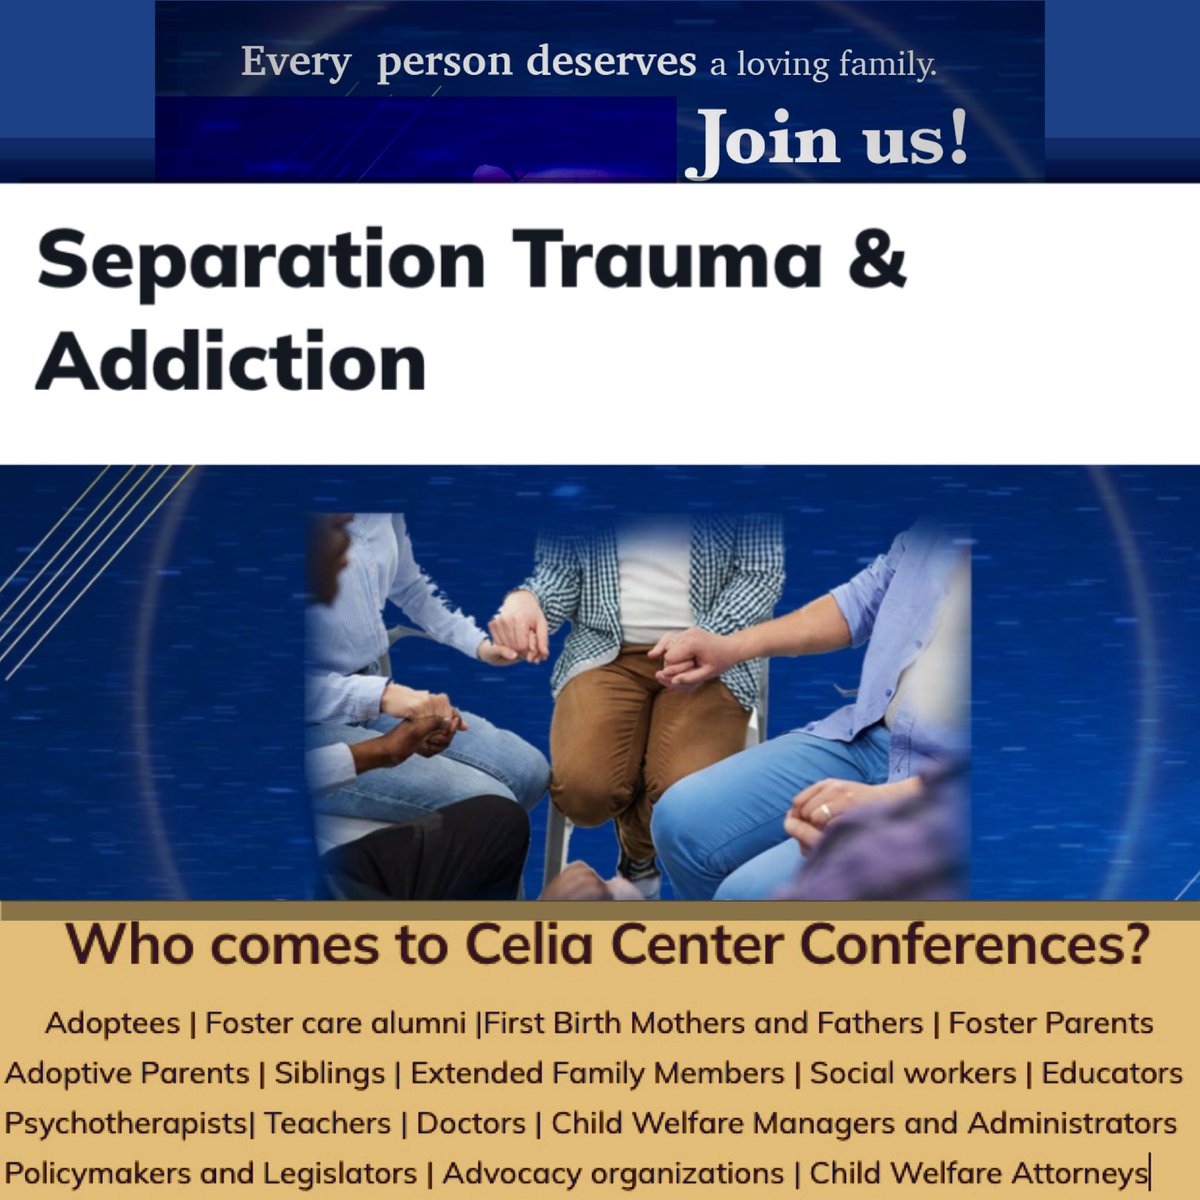 Attend the National Adoption Conference to join Separation Trauma and Addiction Panel held virtually Fri Nov 10th . 10-11:30a with David B. Bohl —> #adoption #adopteejourney #adoptionconstellation #conference 

tinyurl.com/344cepz6